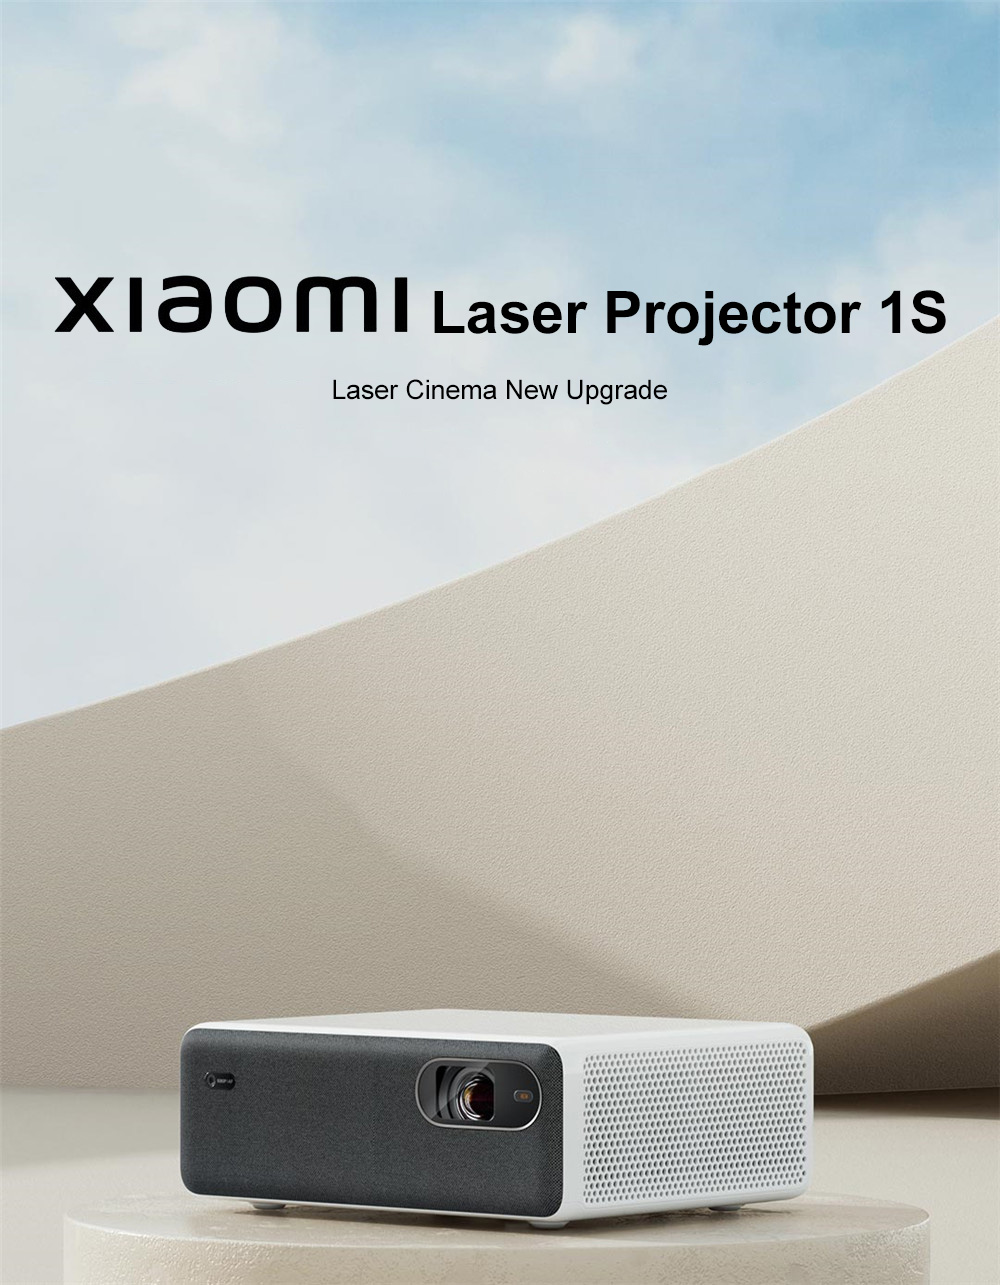 Xiaomi-Iaser-projector-1S-ALPD-2400-ANSI-Lumens-4k-Resolution-Supported-250-Inch-Screen-Wifi-BT50-ME-1963532-1